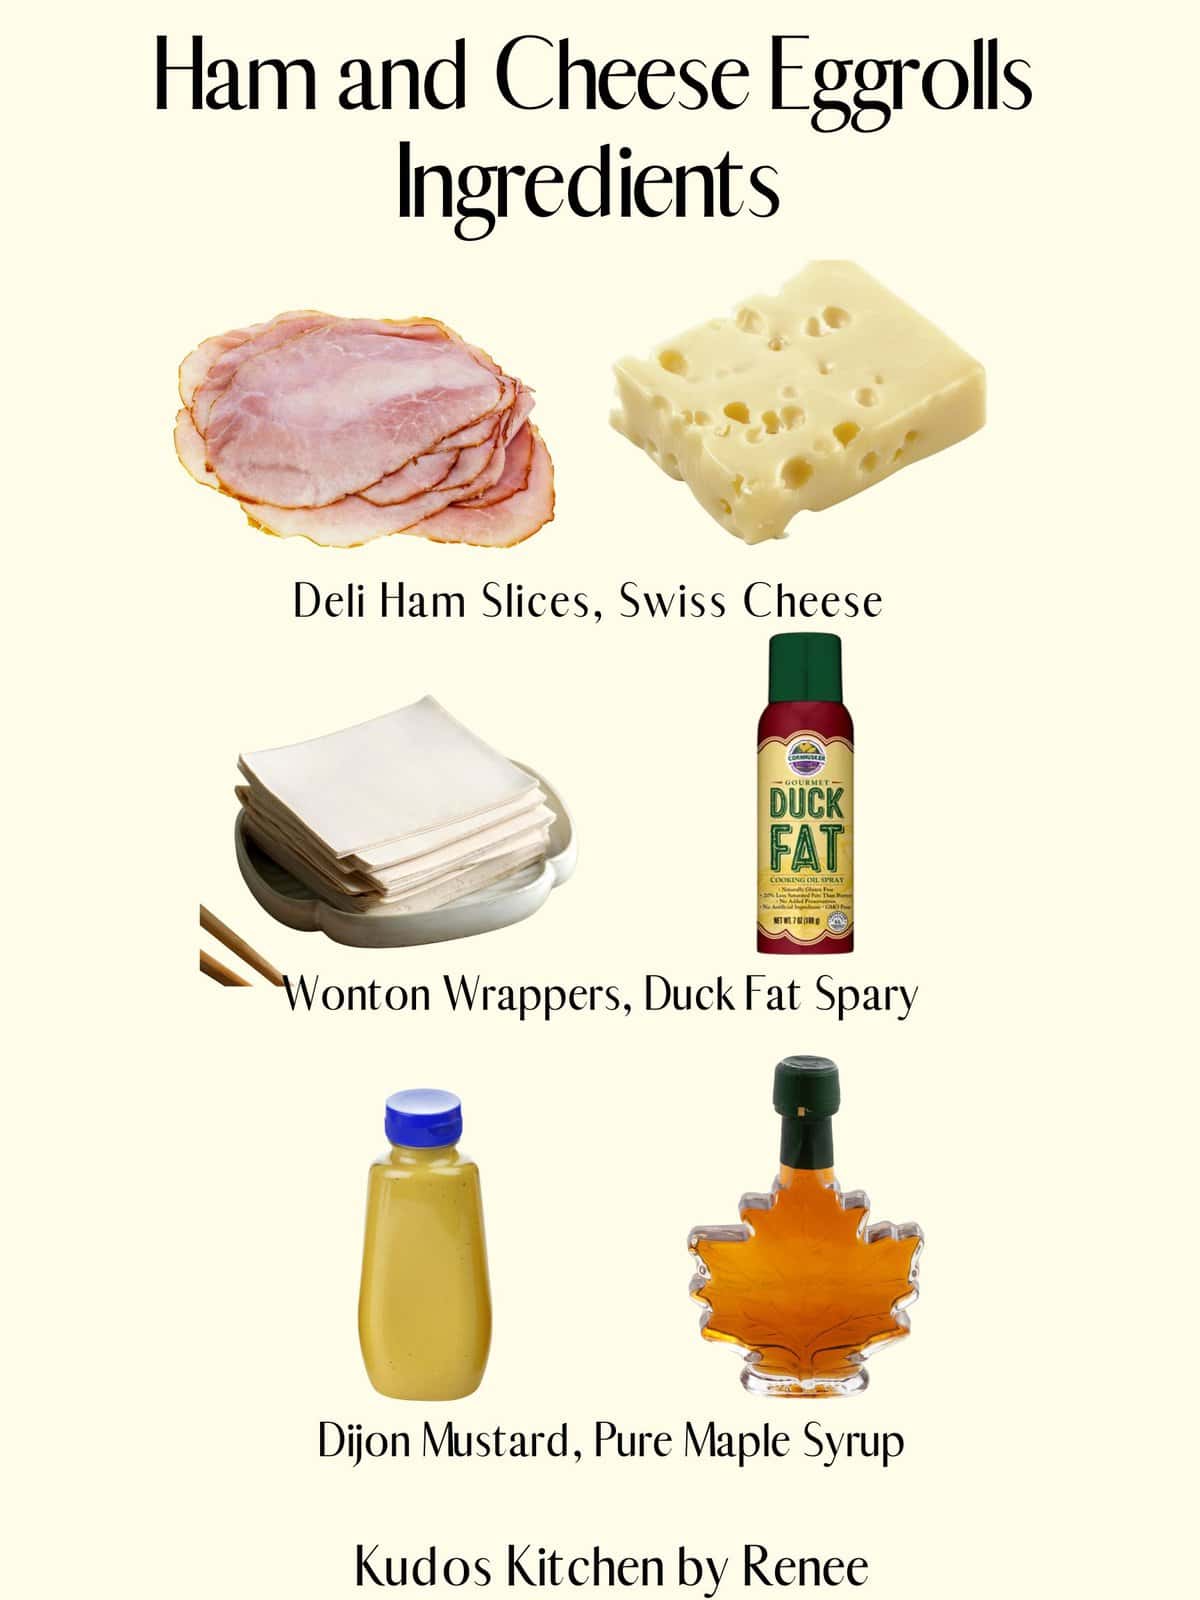 A visual ingredient list for making Ham and Cheese Eggroll Appetizers.